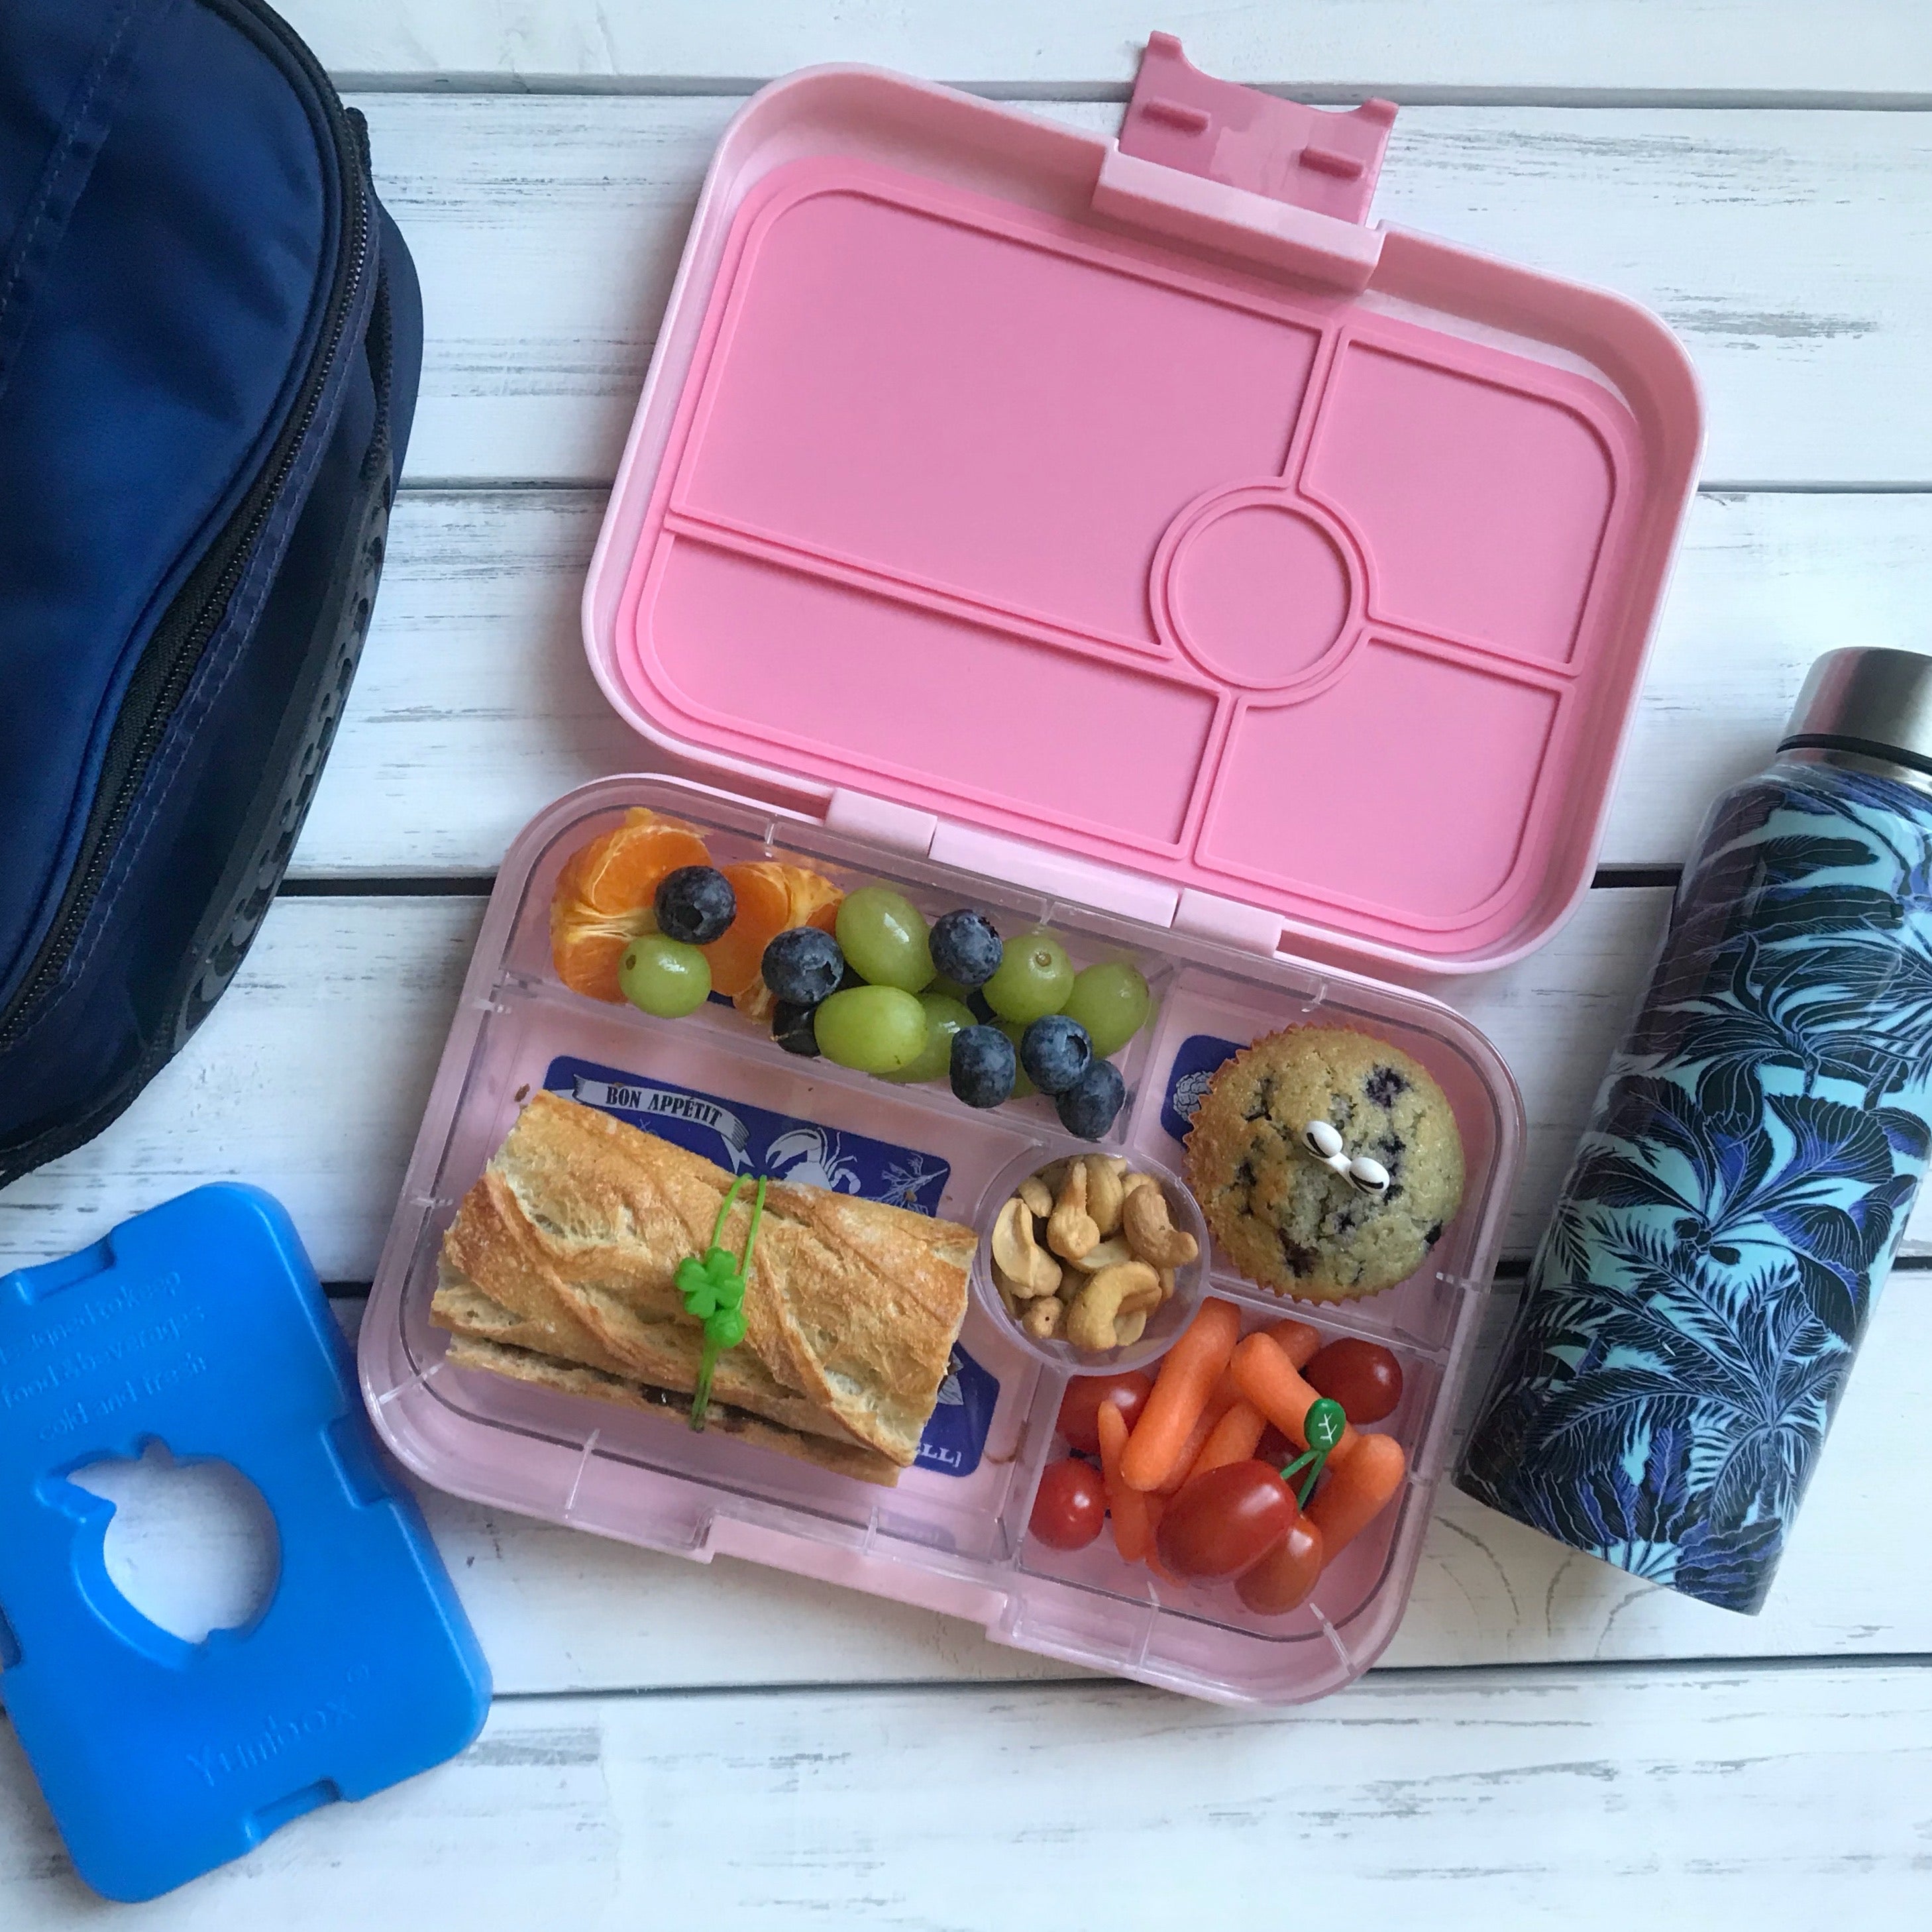 Yumbox Tapas Groovy Antibes Blue 4C Tray - Largest Size